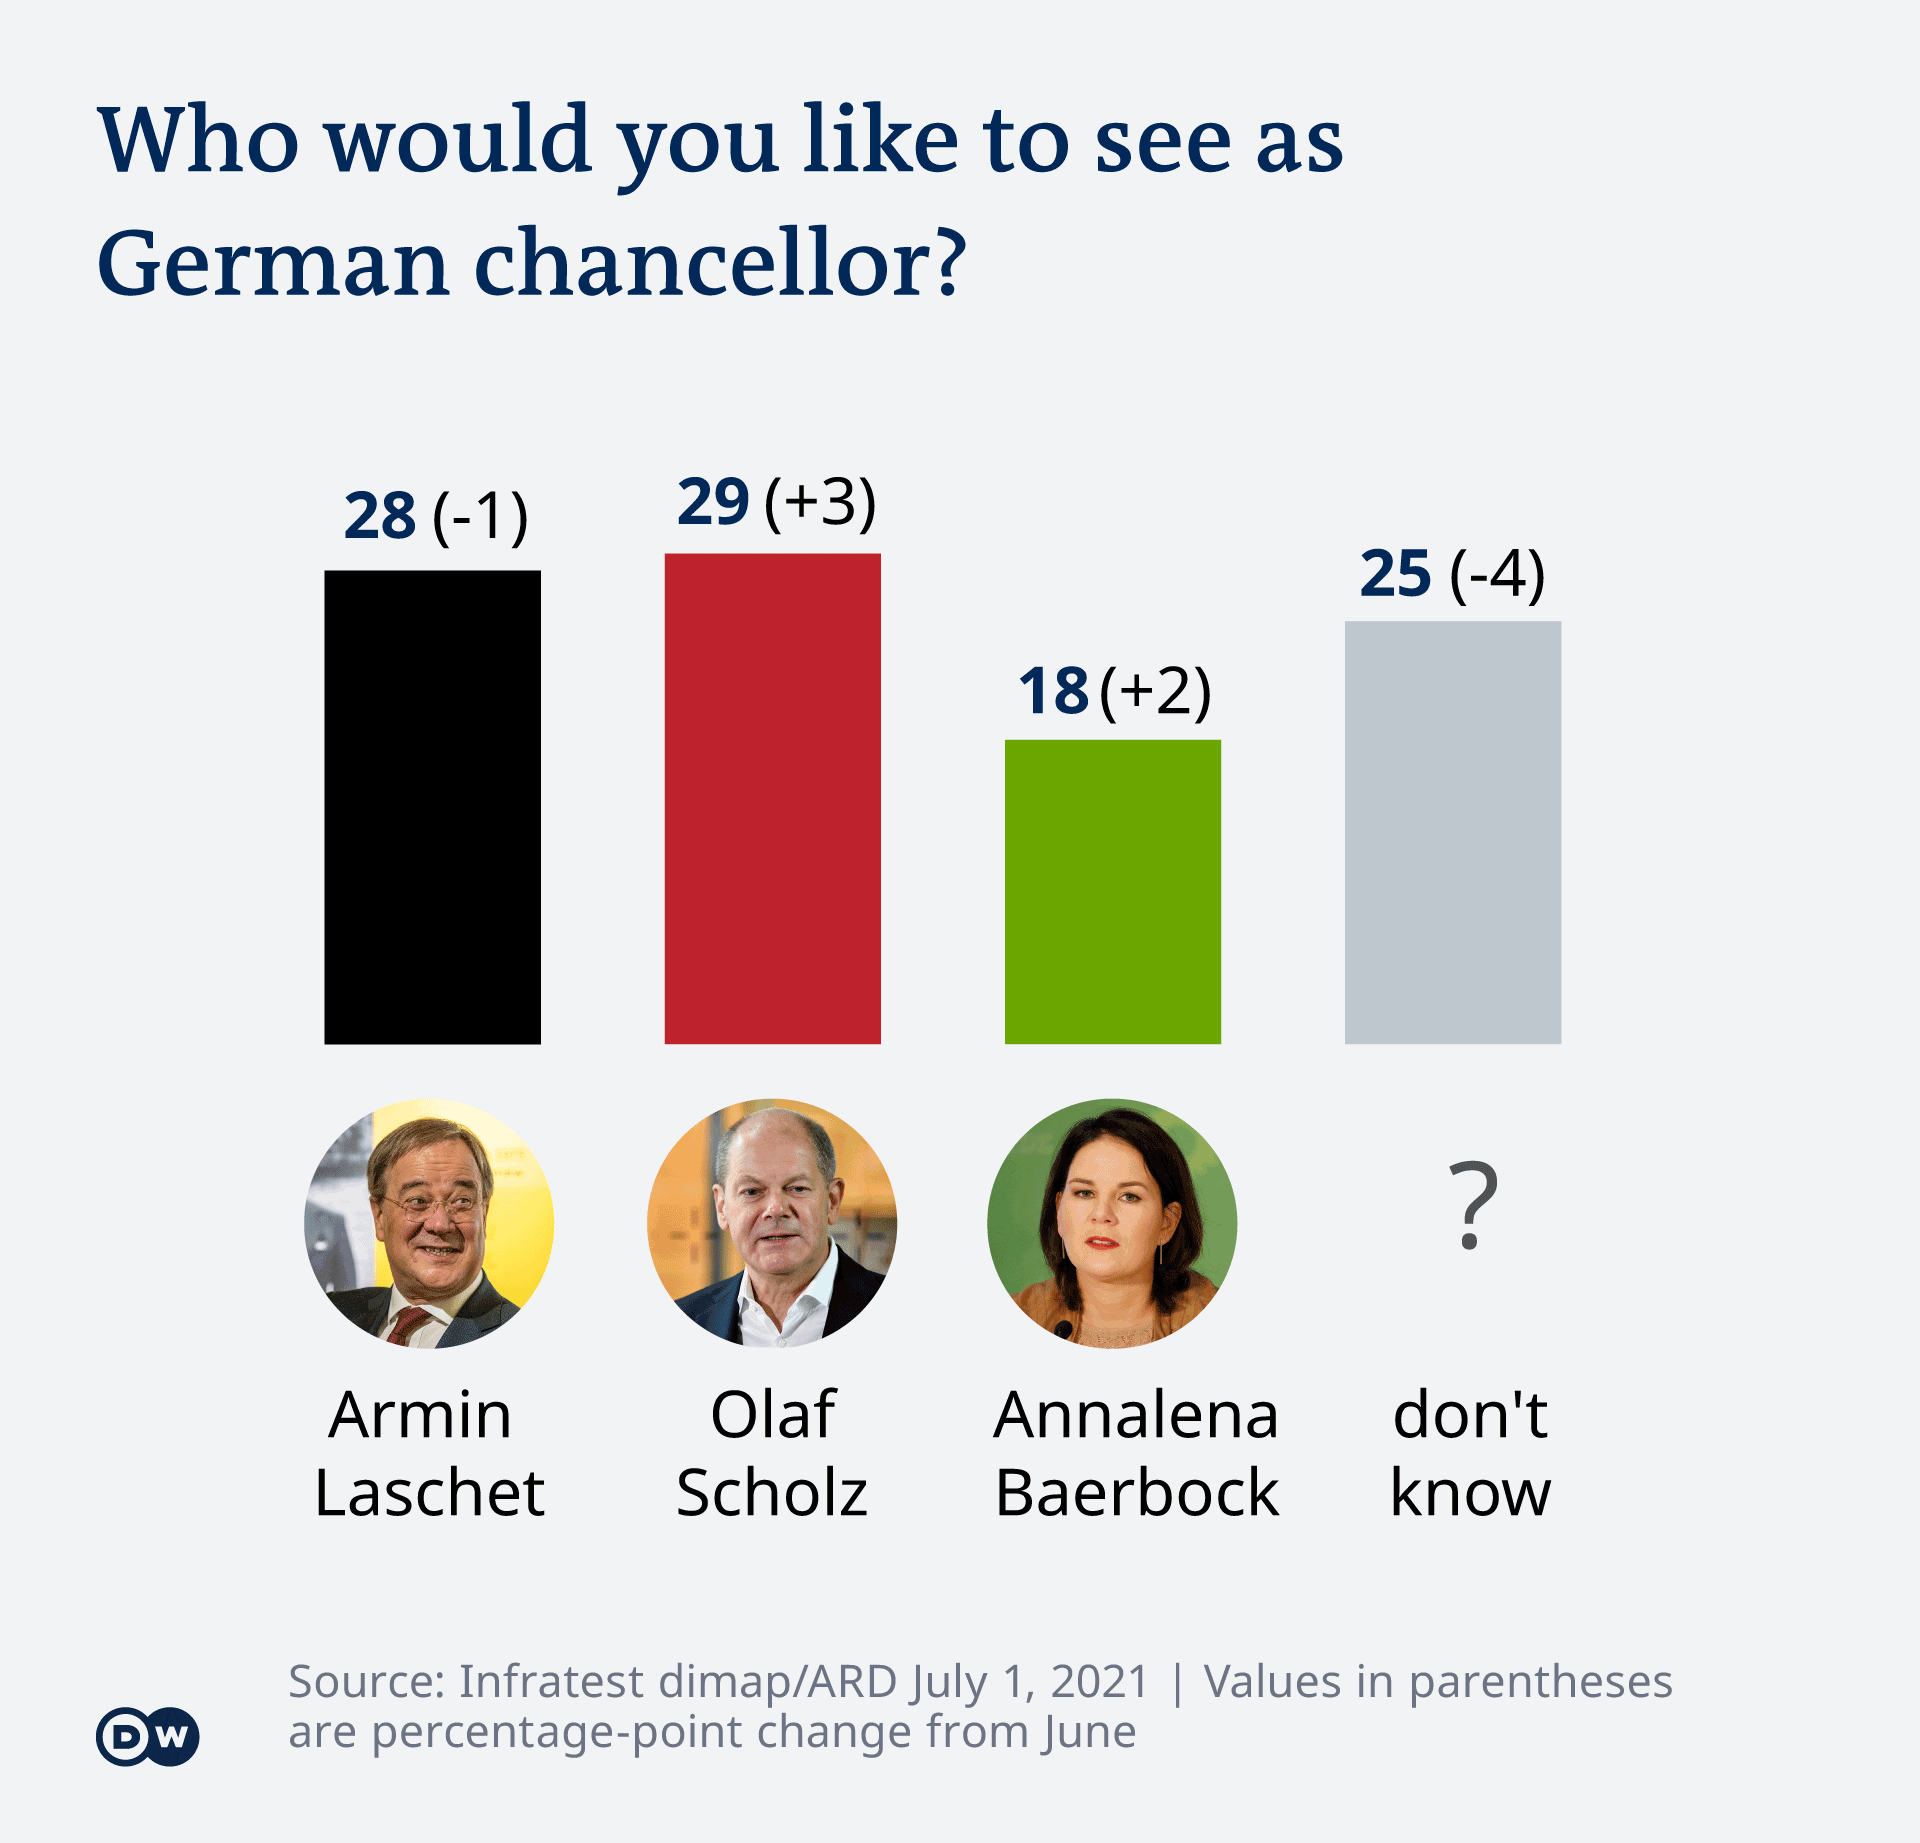 Survey infographic shows Olaf Scholz with 29% support for chancellor, Baerbock at 18%